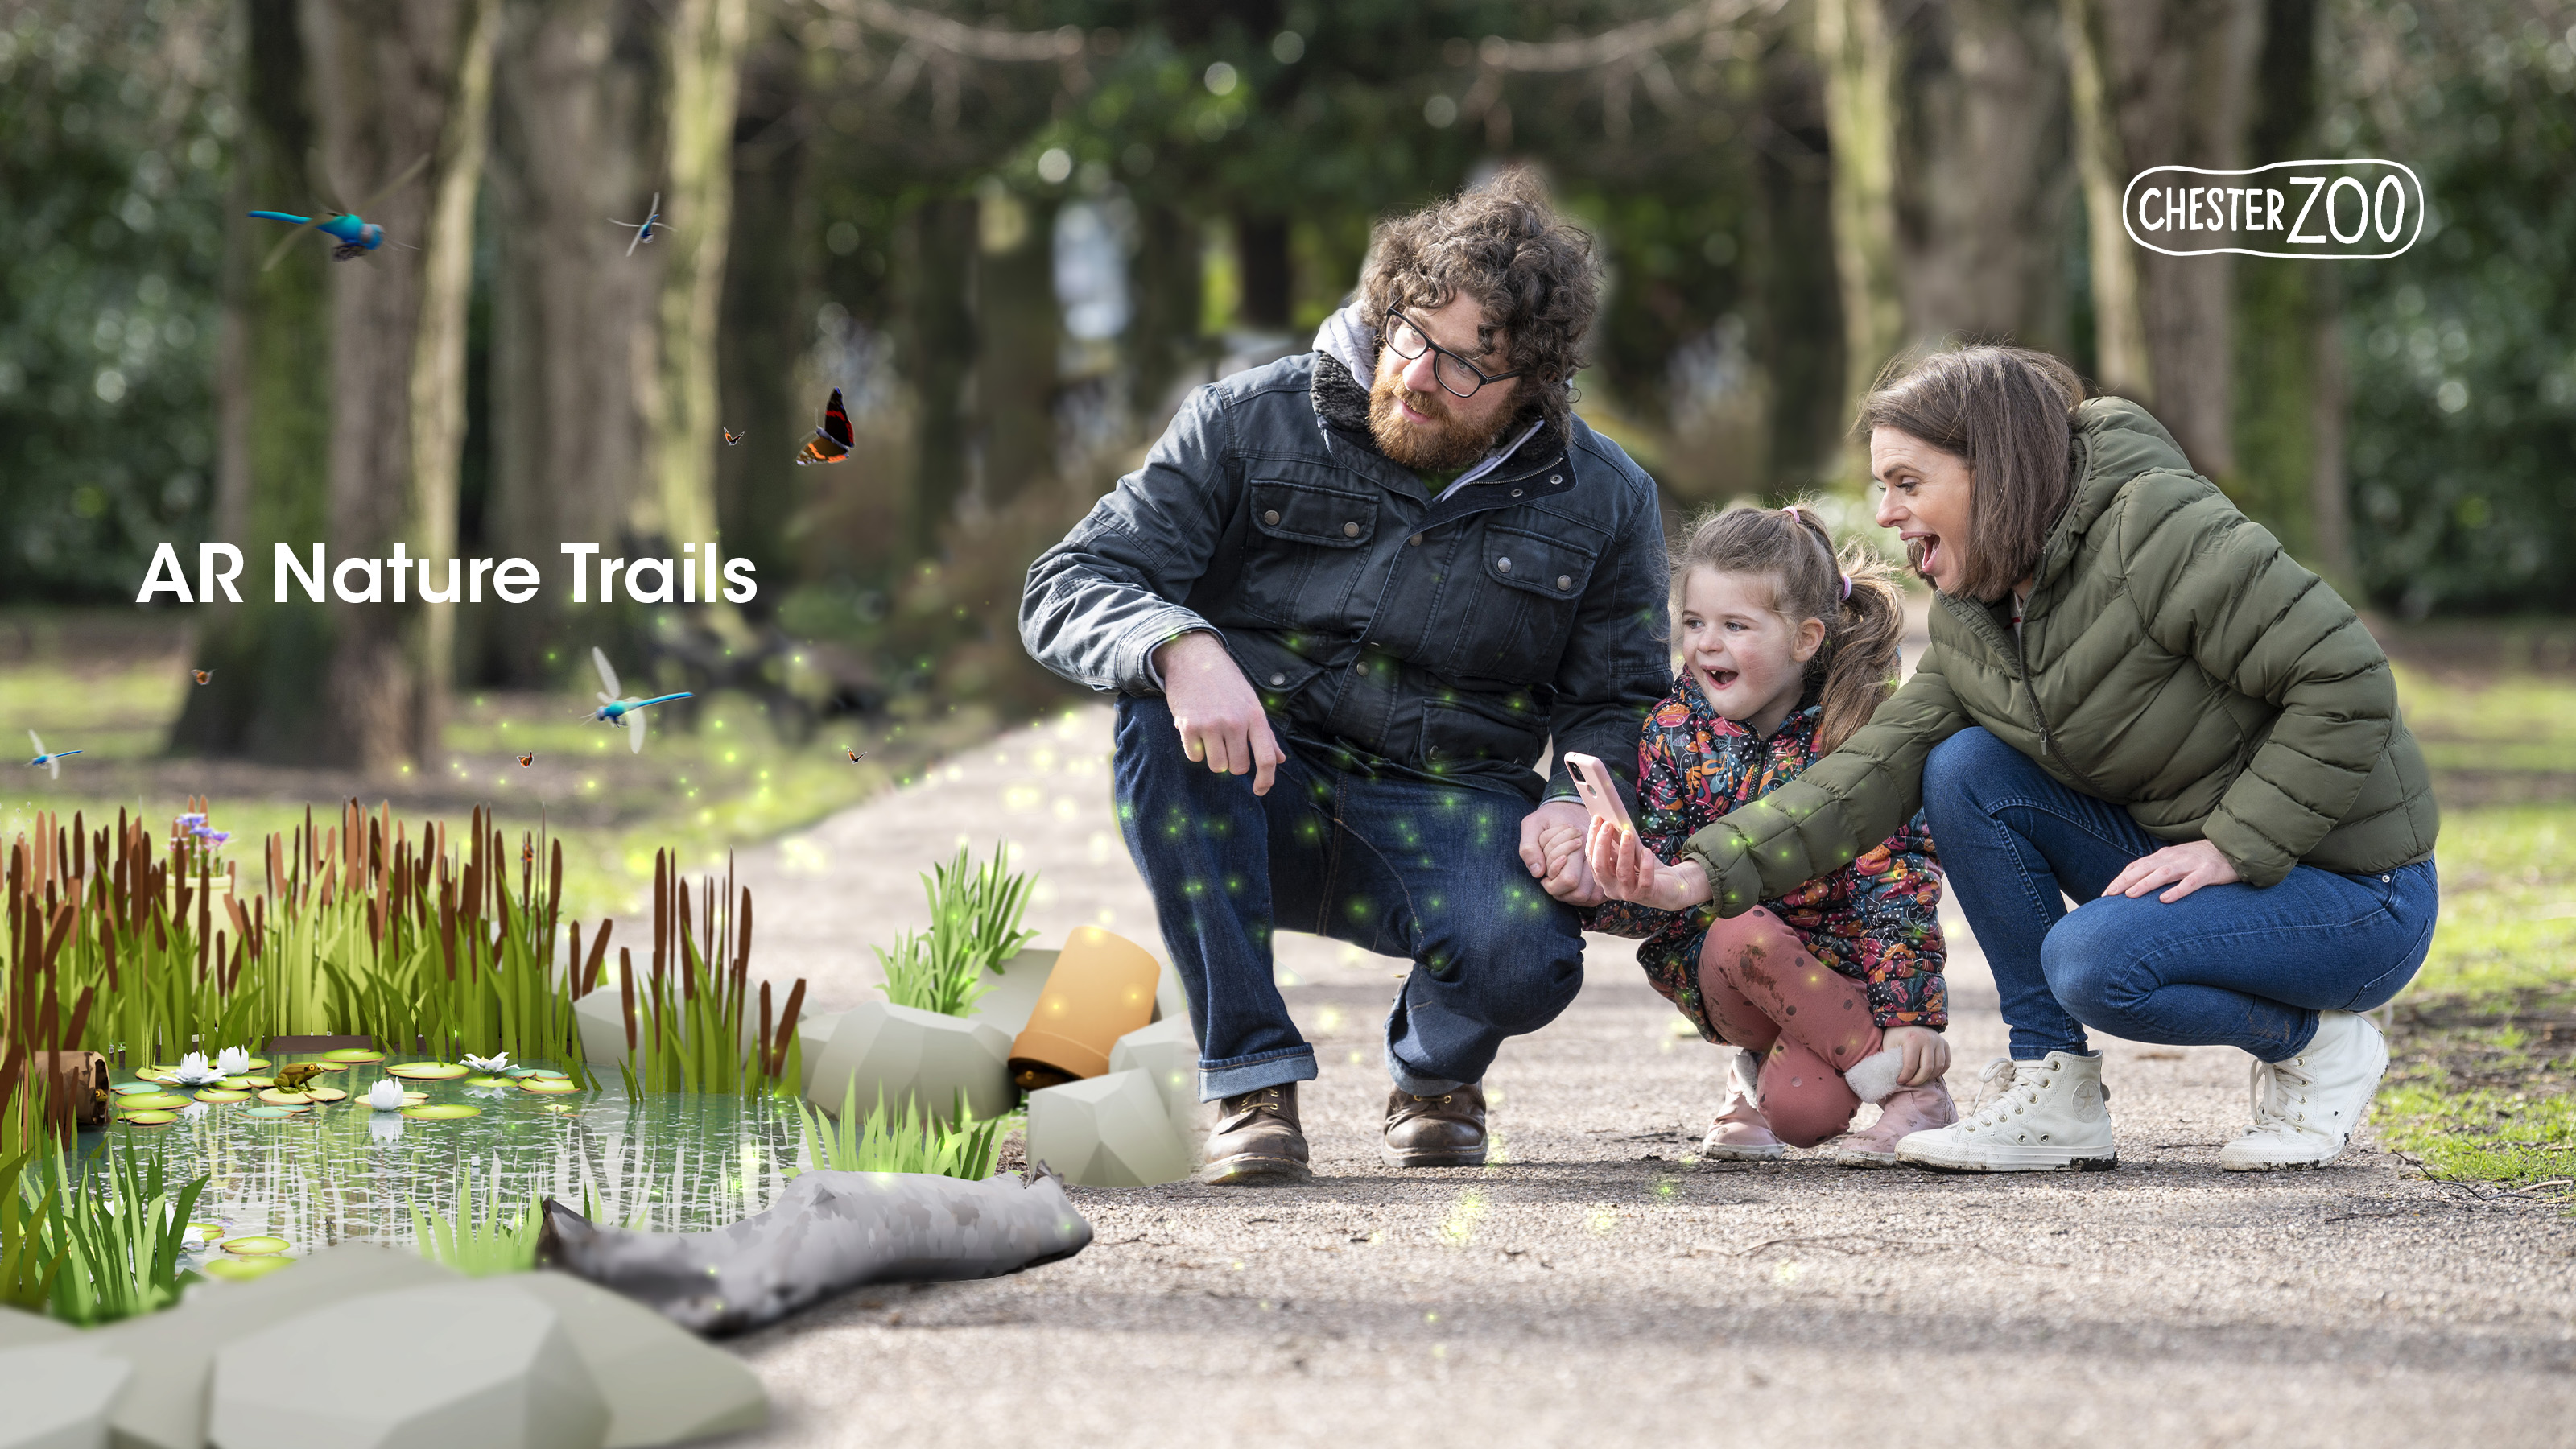 AR Nature Trails – Chester Zoo